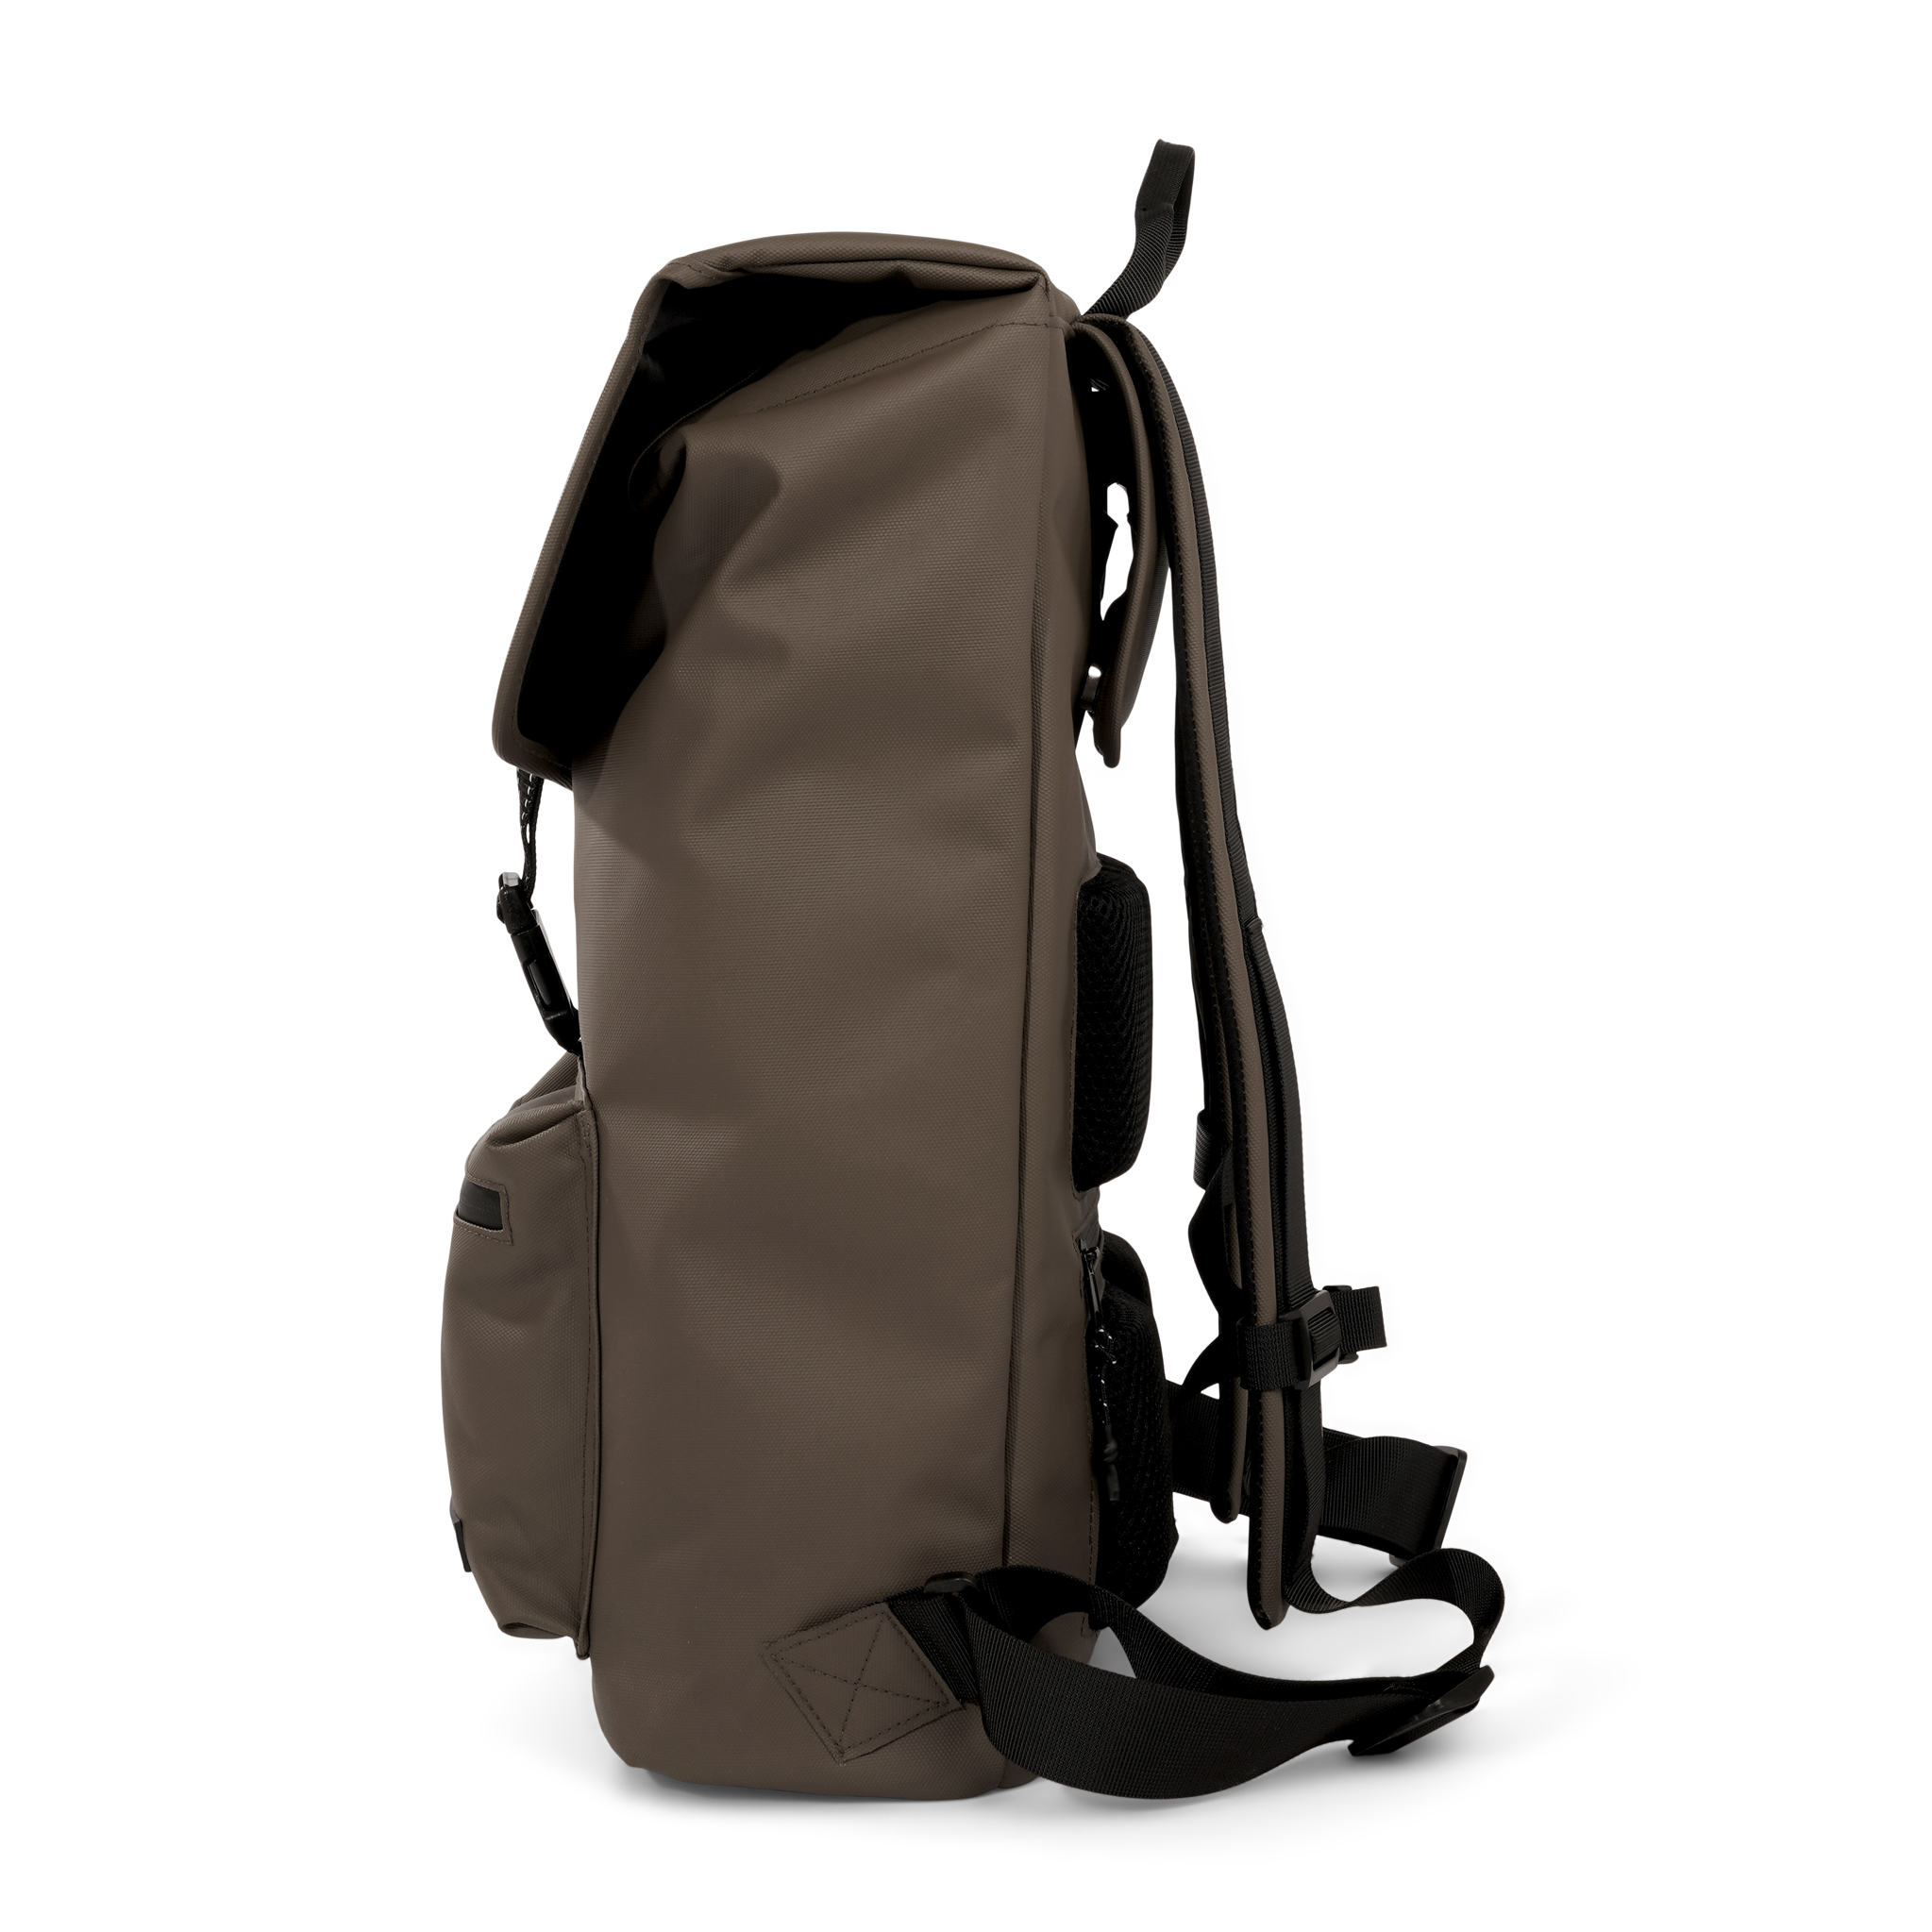 sac-a-dos-cargo-bikepack-recycled-cargo-backpack-brown-urban-proof-marron